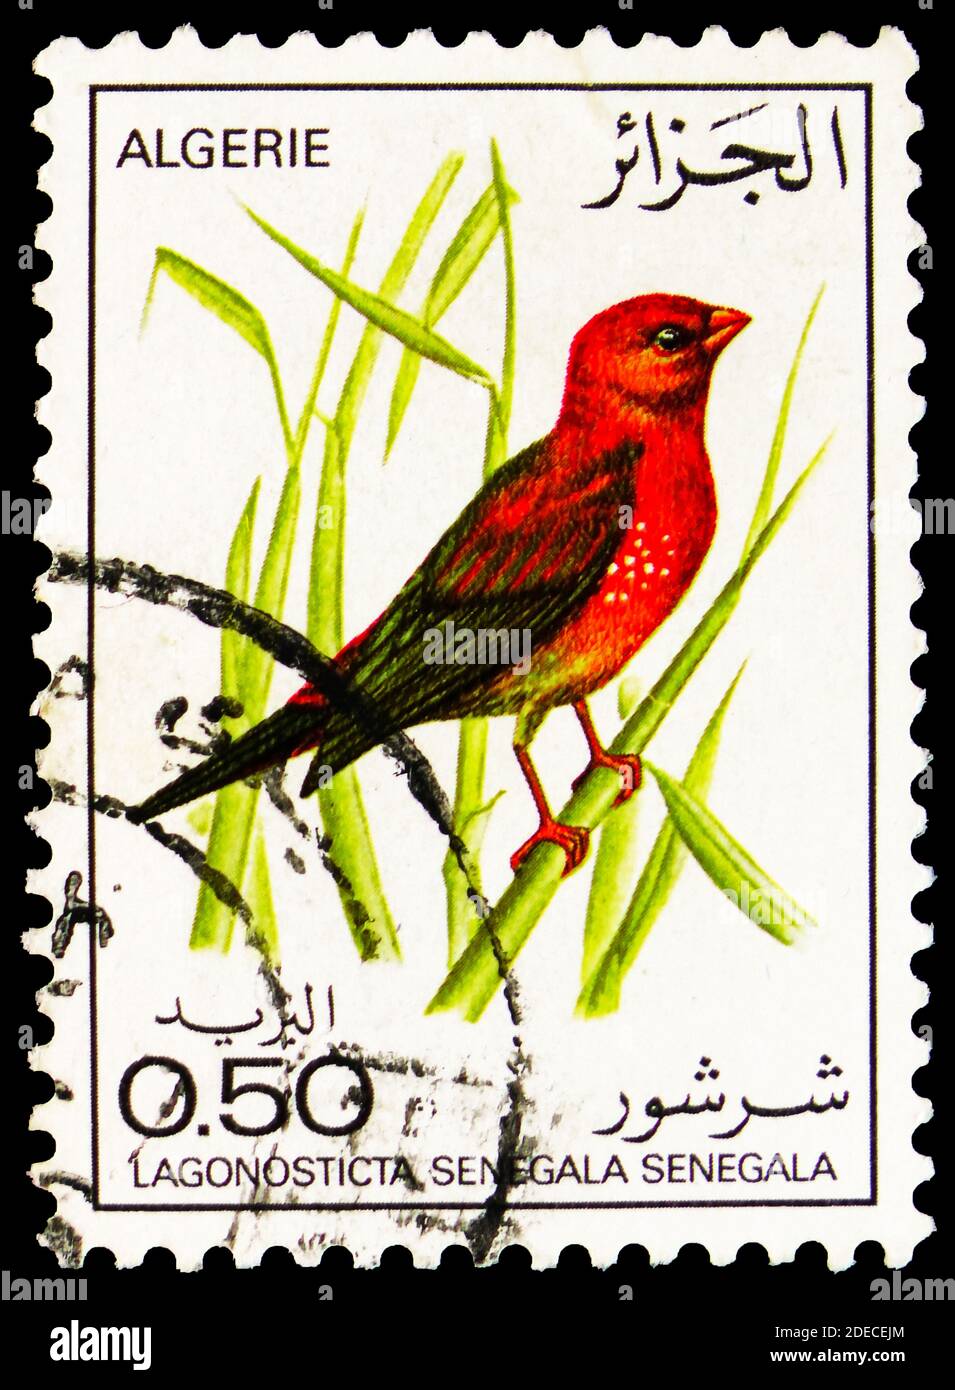 MOSCOW, RUSSIA - OCTOBER 17, 2020: Postage stamp printed in Algeria shows Red-billed Firefinch (Lagonosticta senegala senegala), Birds serie, circa 19 Stock Photo